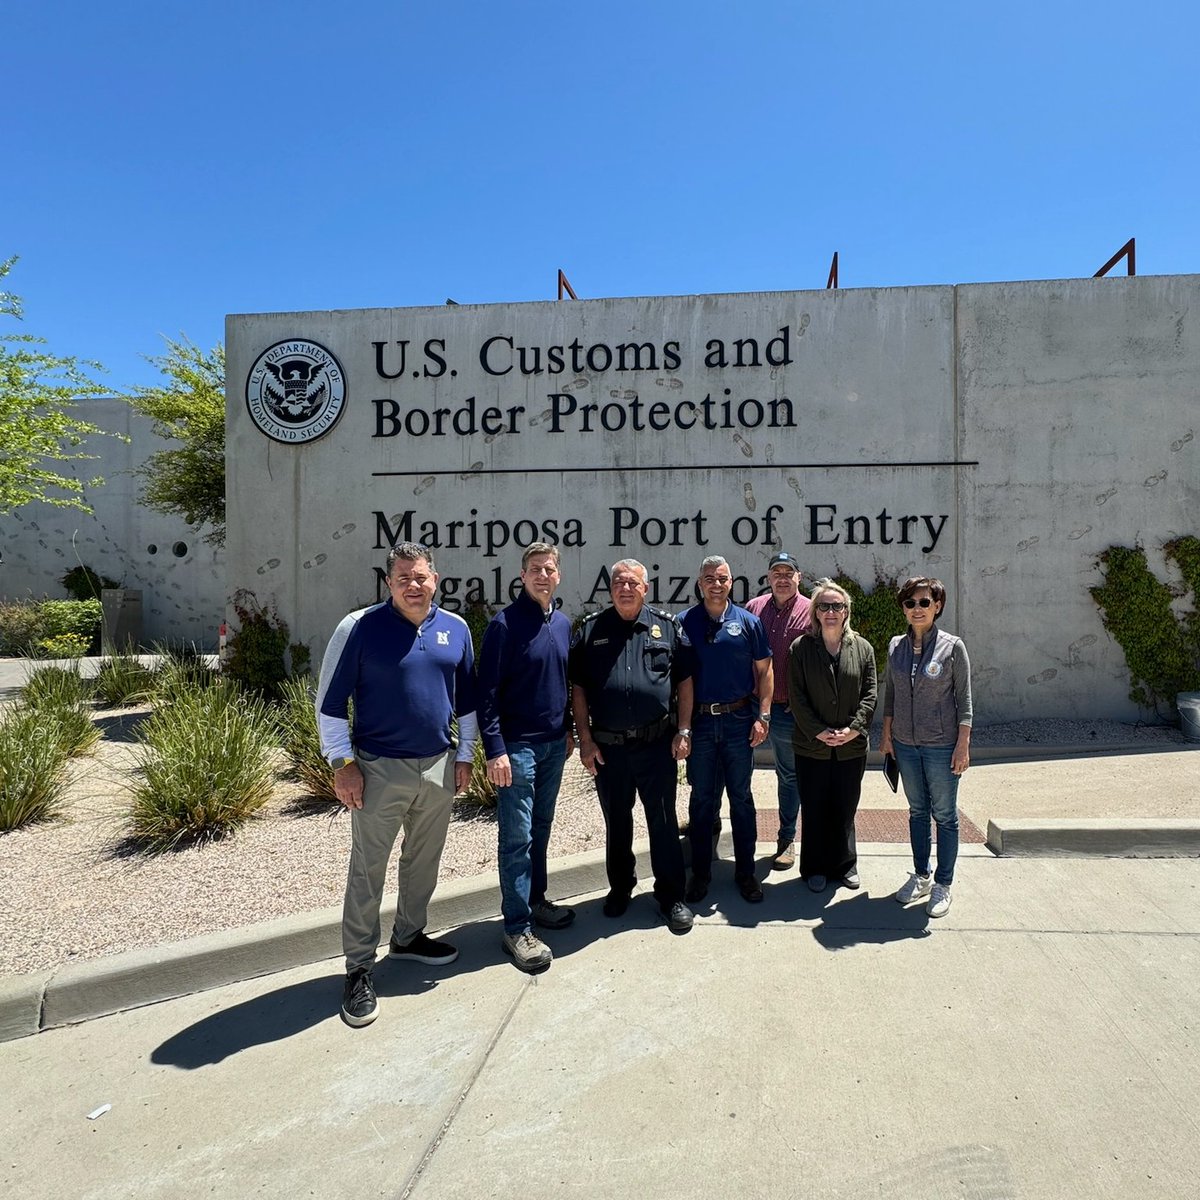 Witnessing border challenges firsthand, I learned about 'Give Up Groups' at Nogales Station last week. These groups exploit our porous border, crossing illegally and feigning asylum, knowing they'll enter unchecked. It's time for President Biden to return to successful Trump-era…